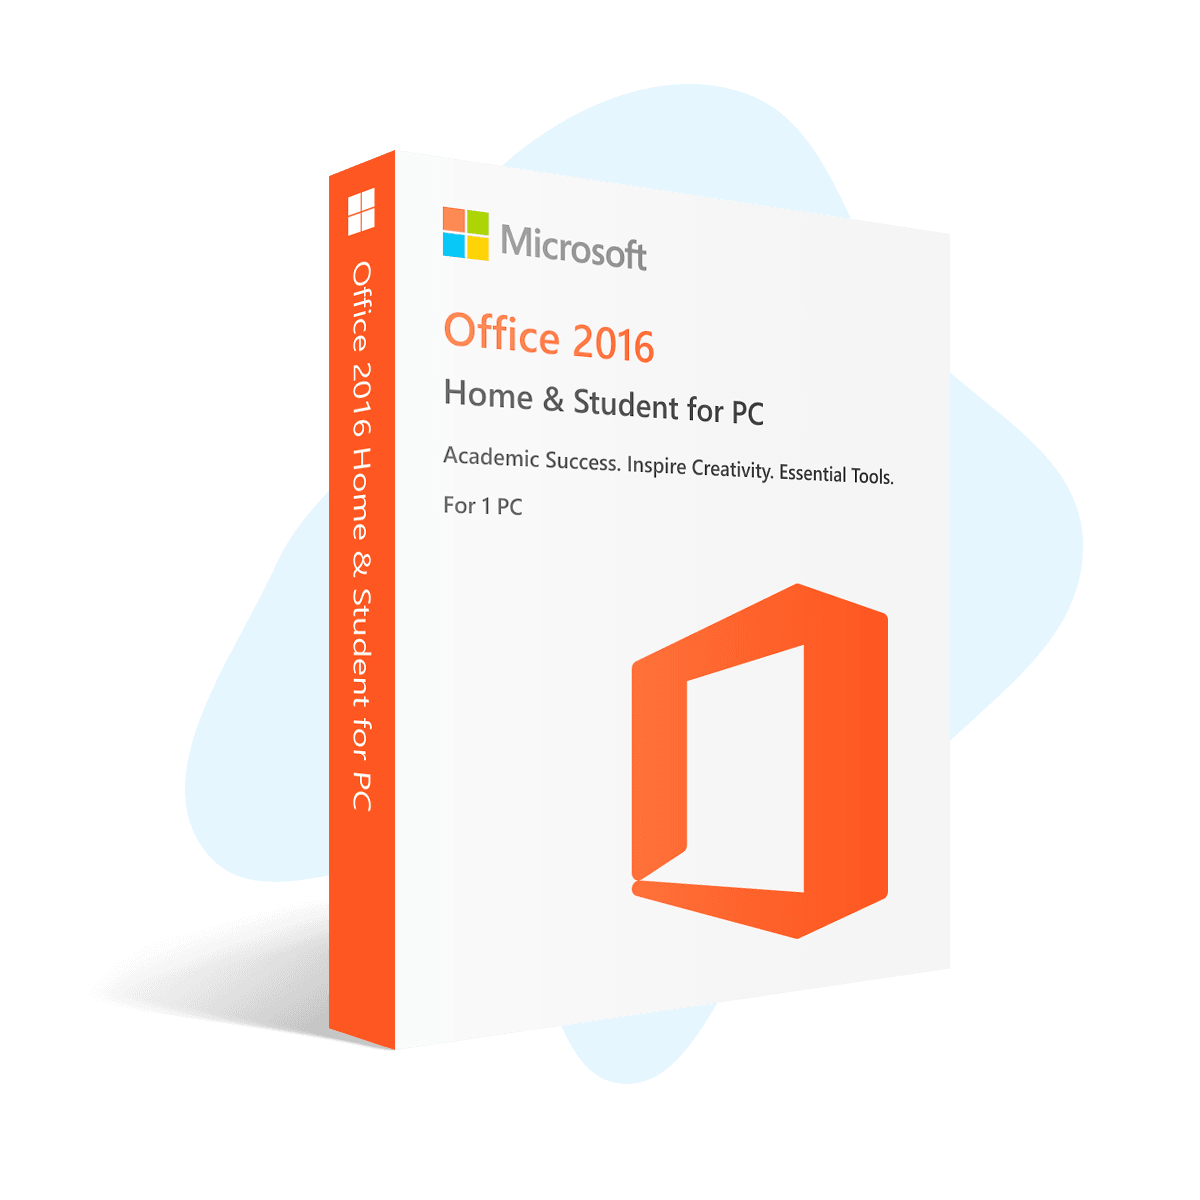 Buy Office 2016 Home & Student for PC Original License - RAPID